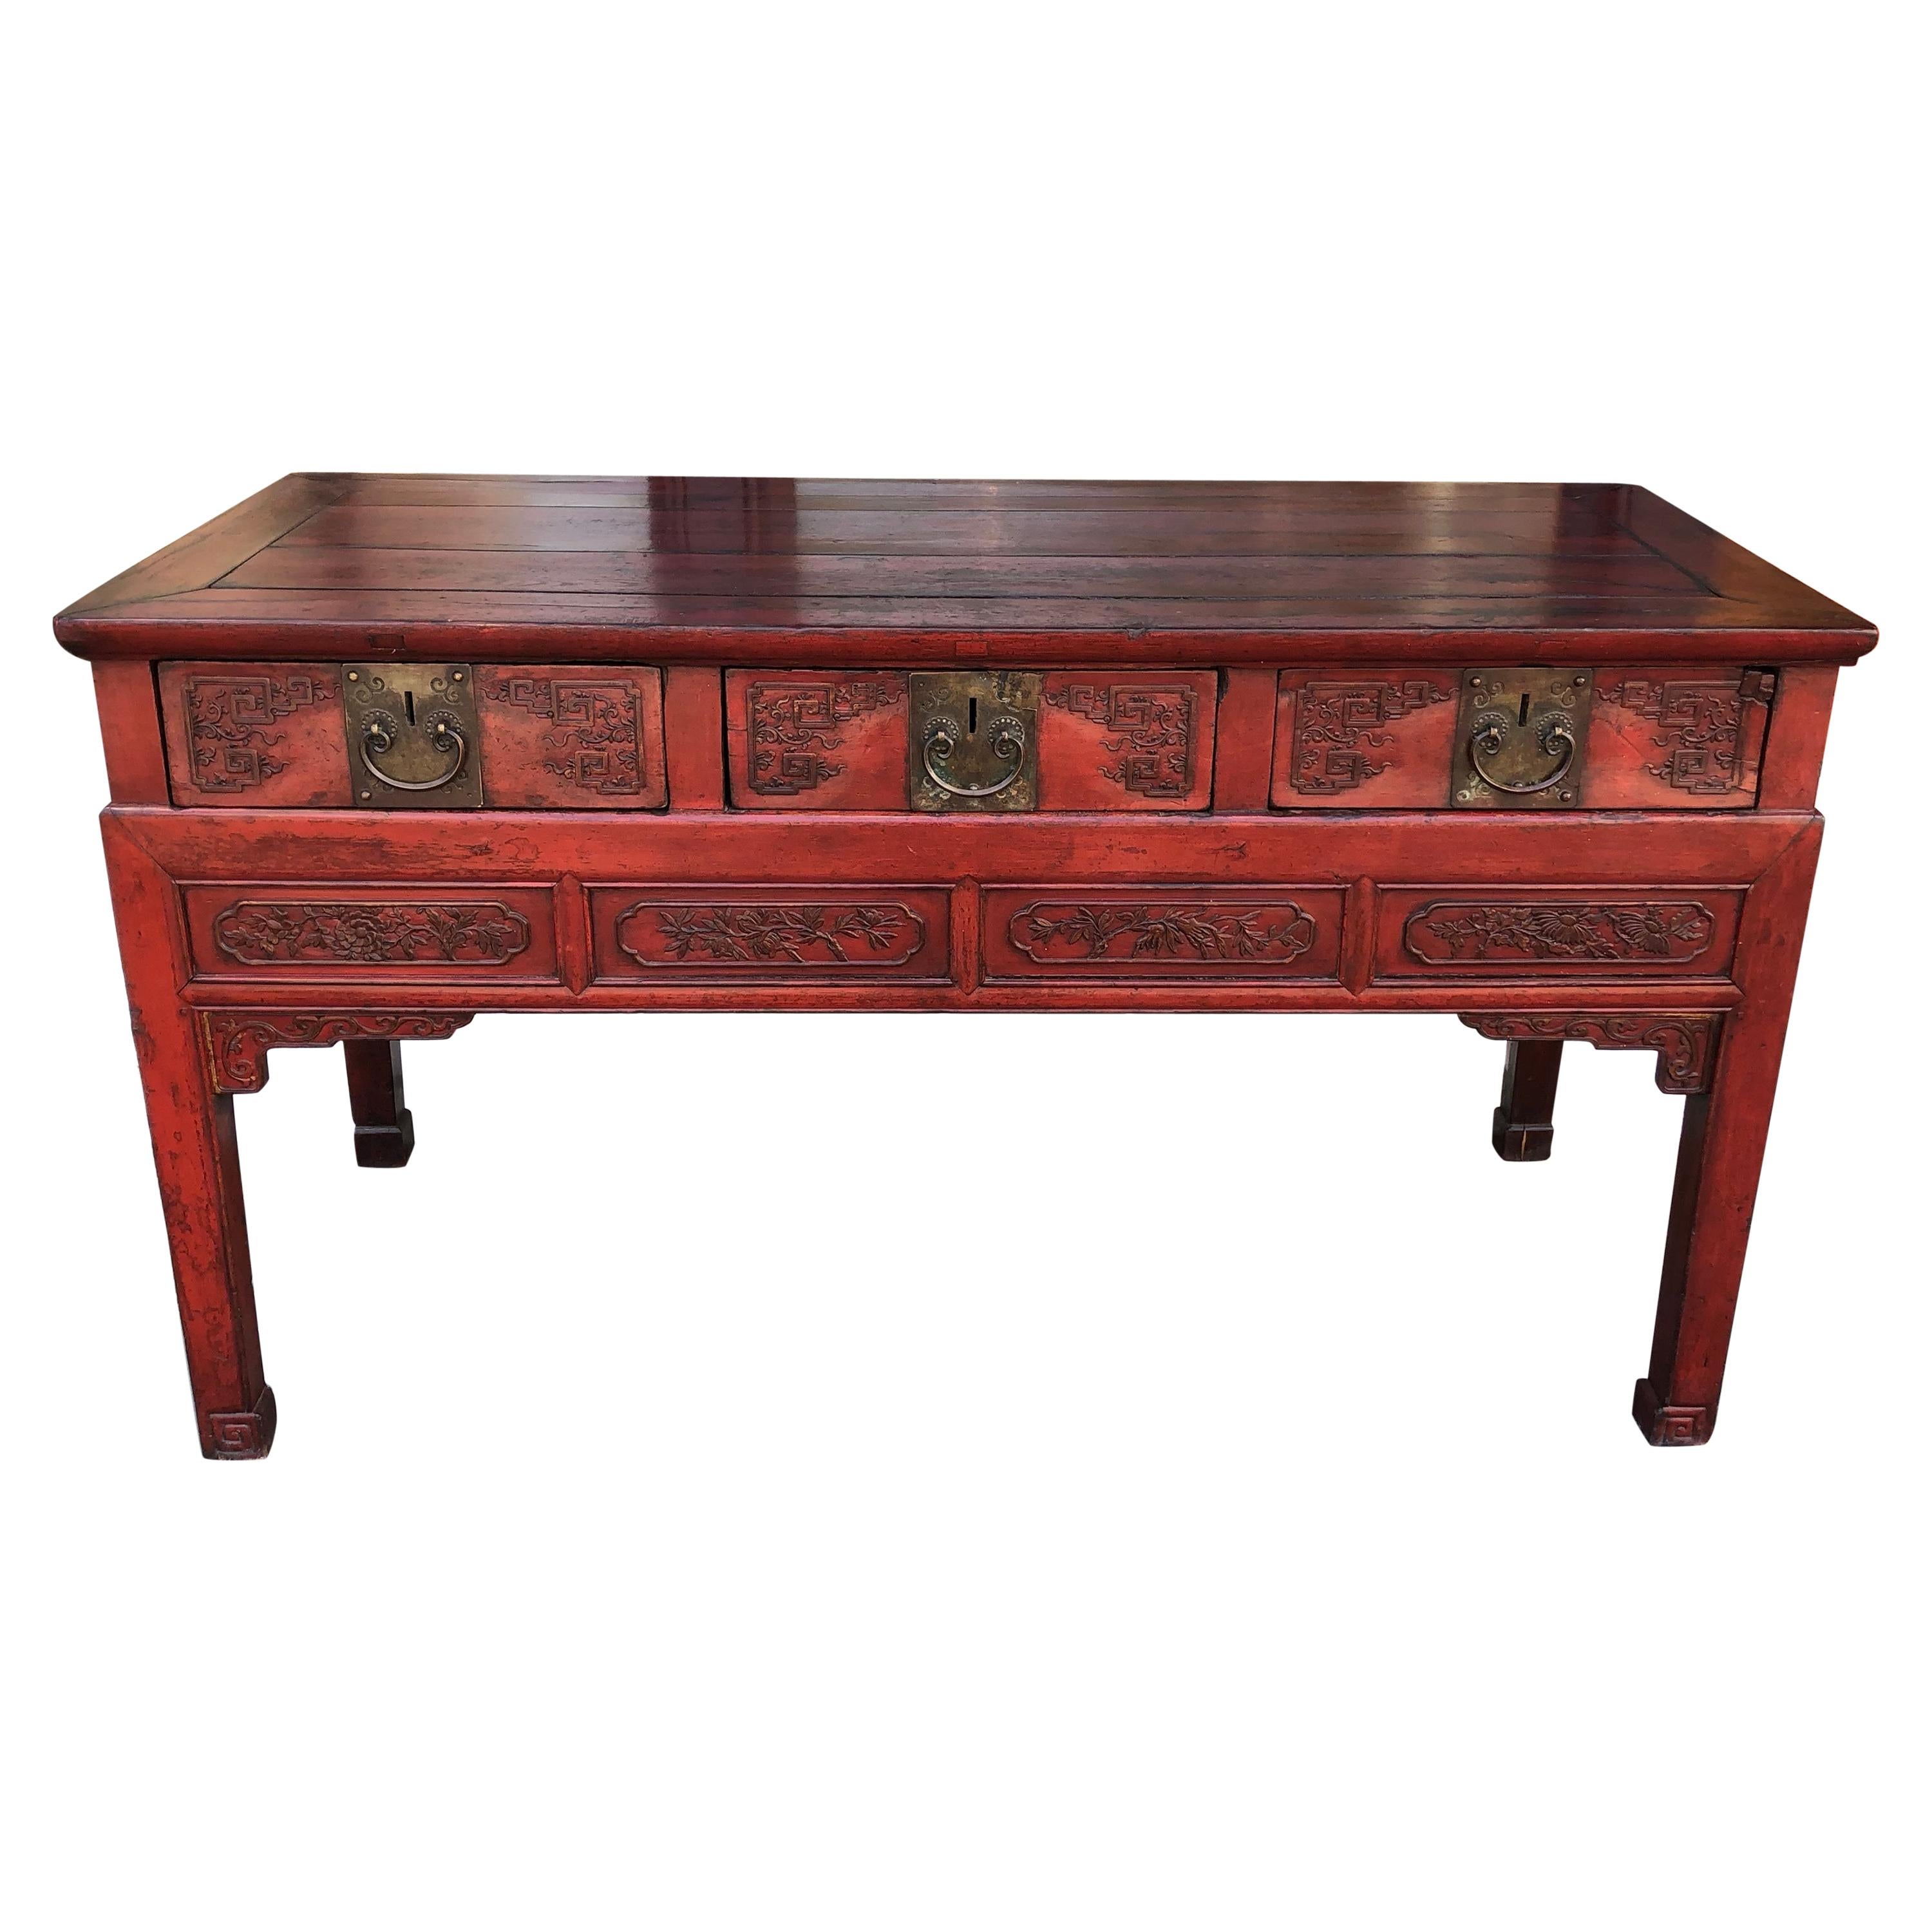 Mid-19th Century Server or Sideboard with 3 Drawers and Carved Details in Drawer